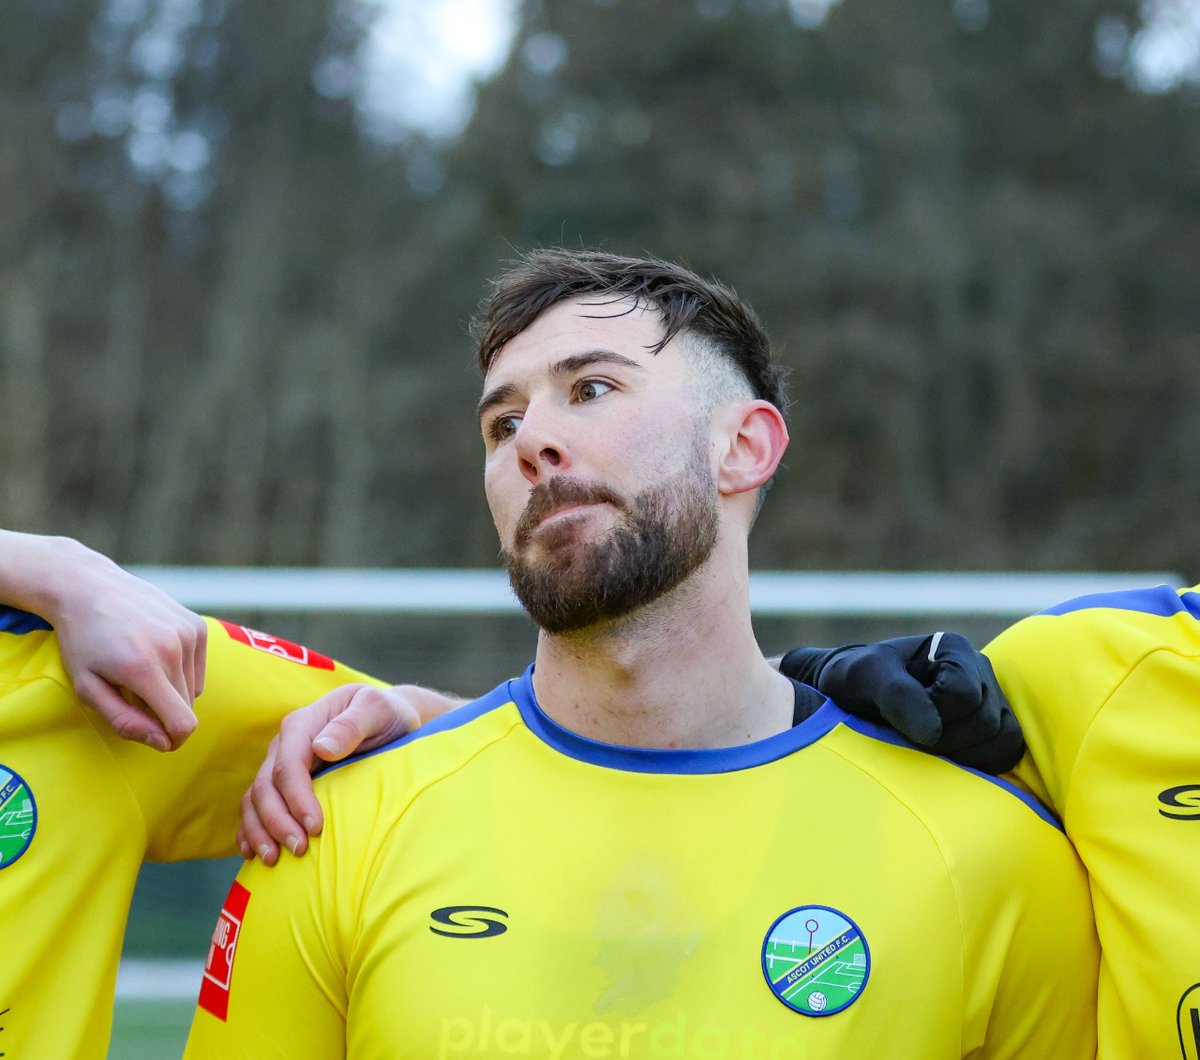 That moment you realise it's the last game of the season... 🙄

Get over and support the #Yellas today for the final time this season as they visit @NorthwoodFC in @IsthmianLeague action.

#WeAreAscot #UpTheYellas 💛💙